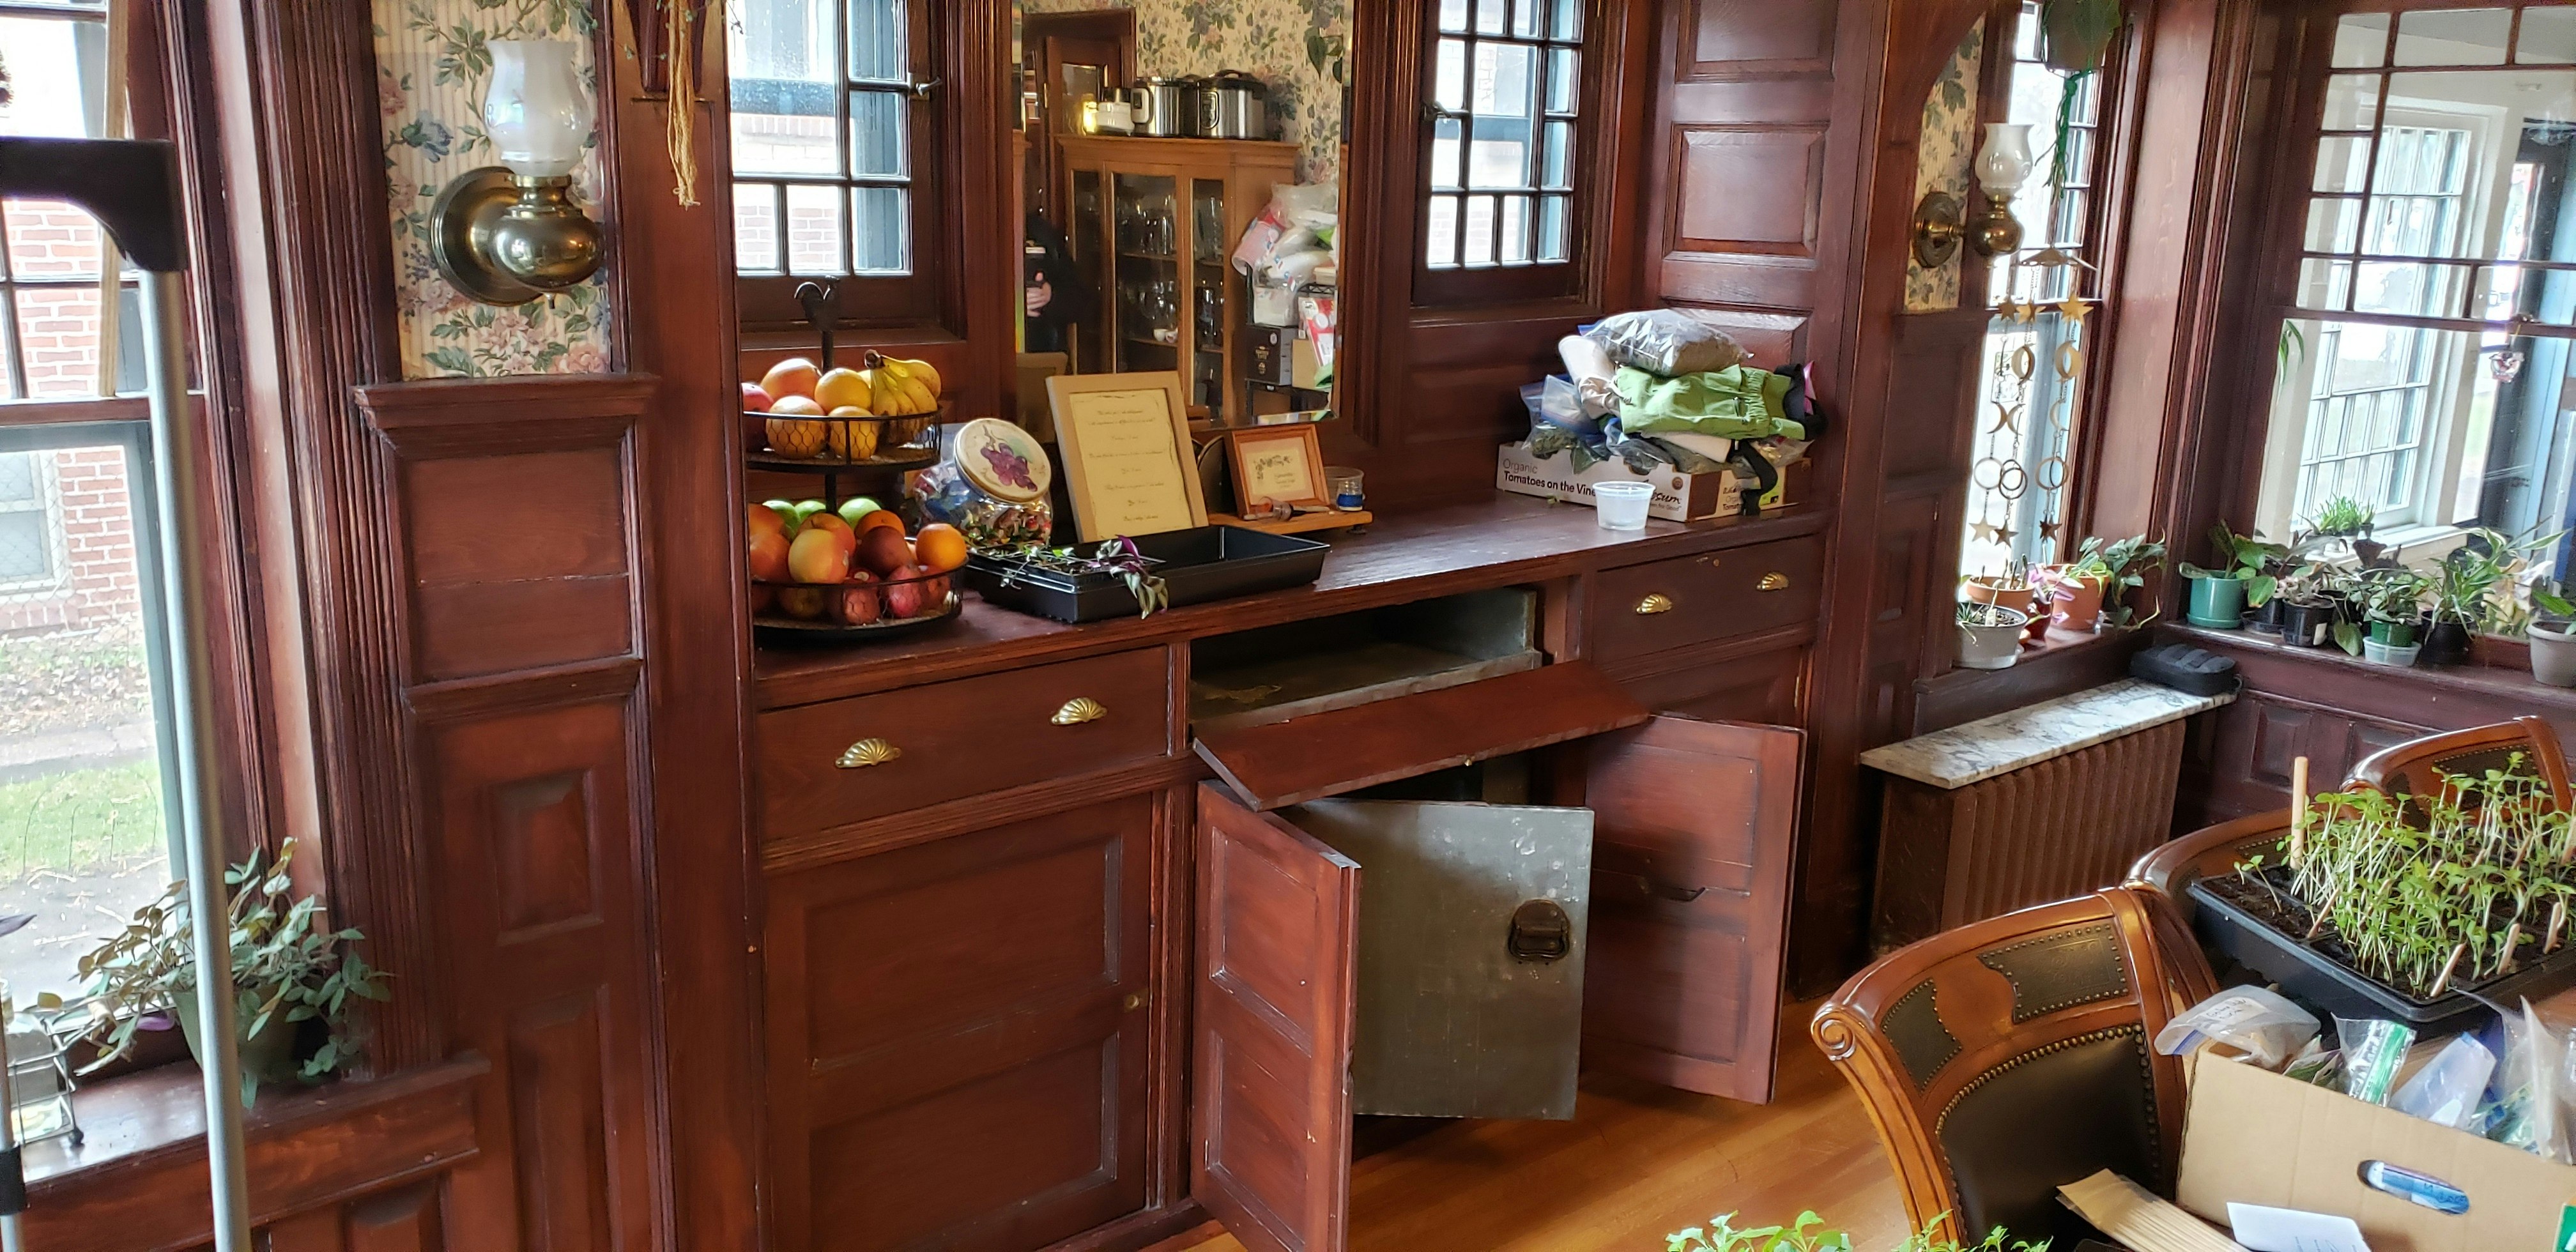 This buffet features an old-style icebox in the center to keep foods and wine cold.